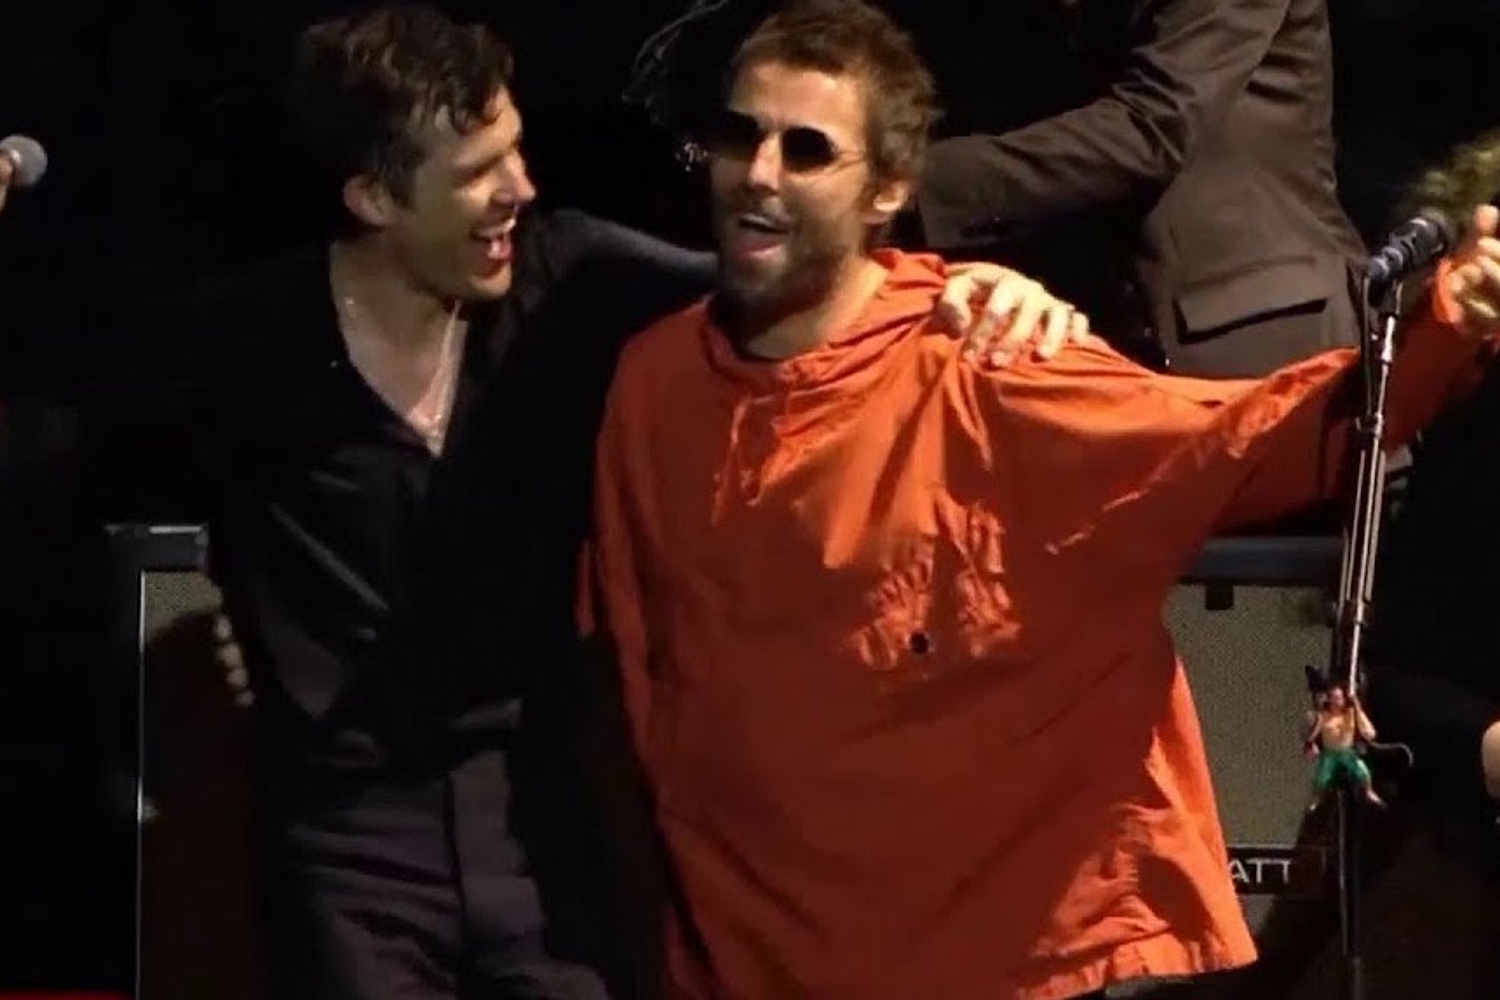 Watch Liam Gallagher join The Killers on stage in Brazil